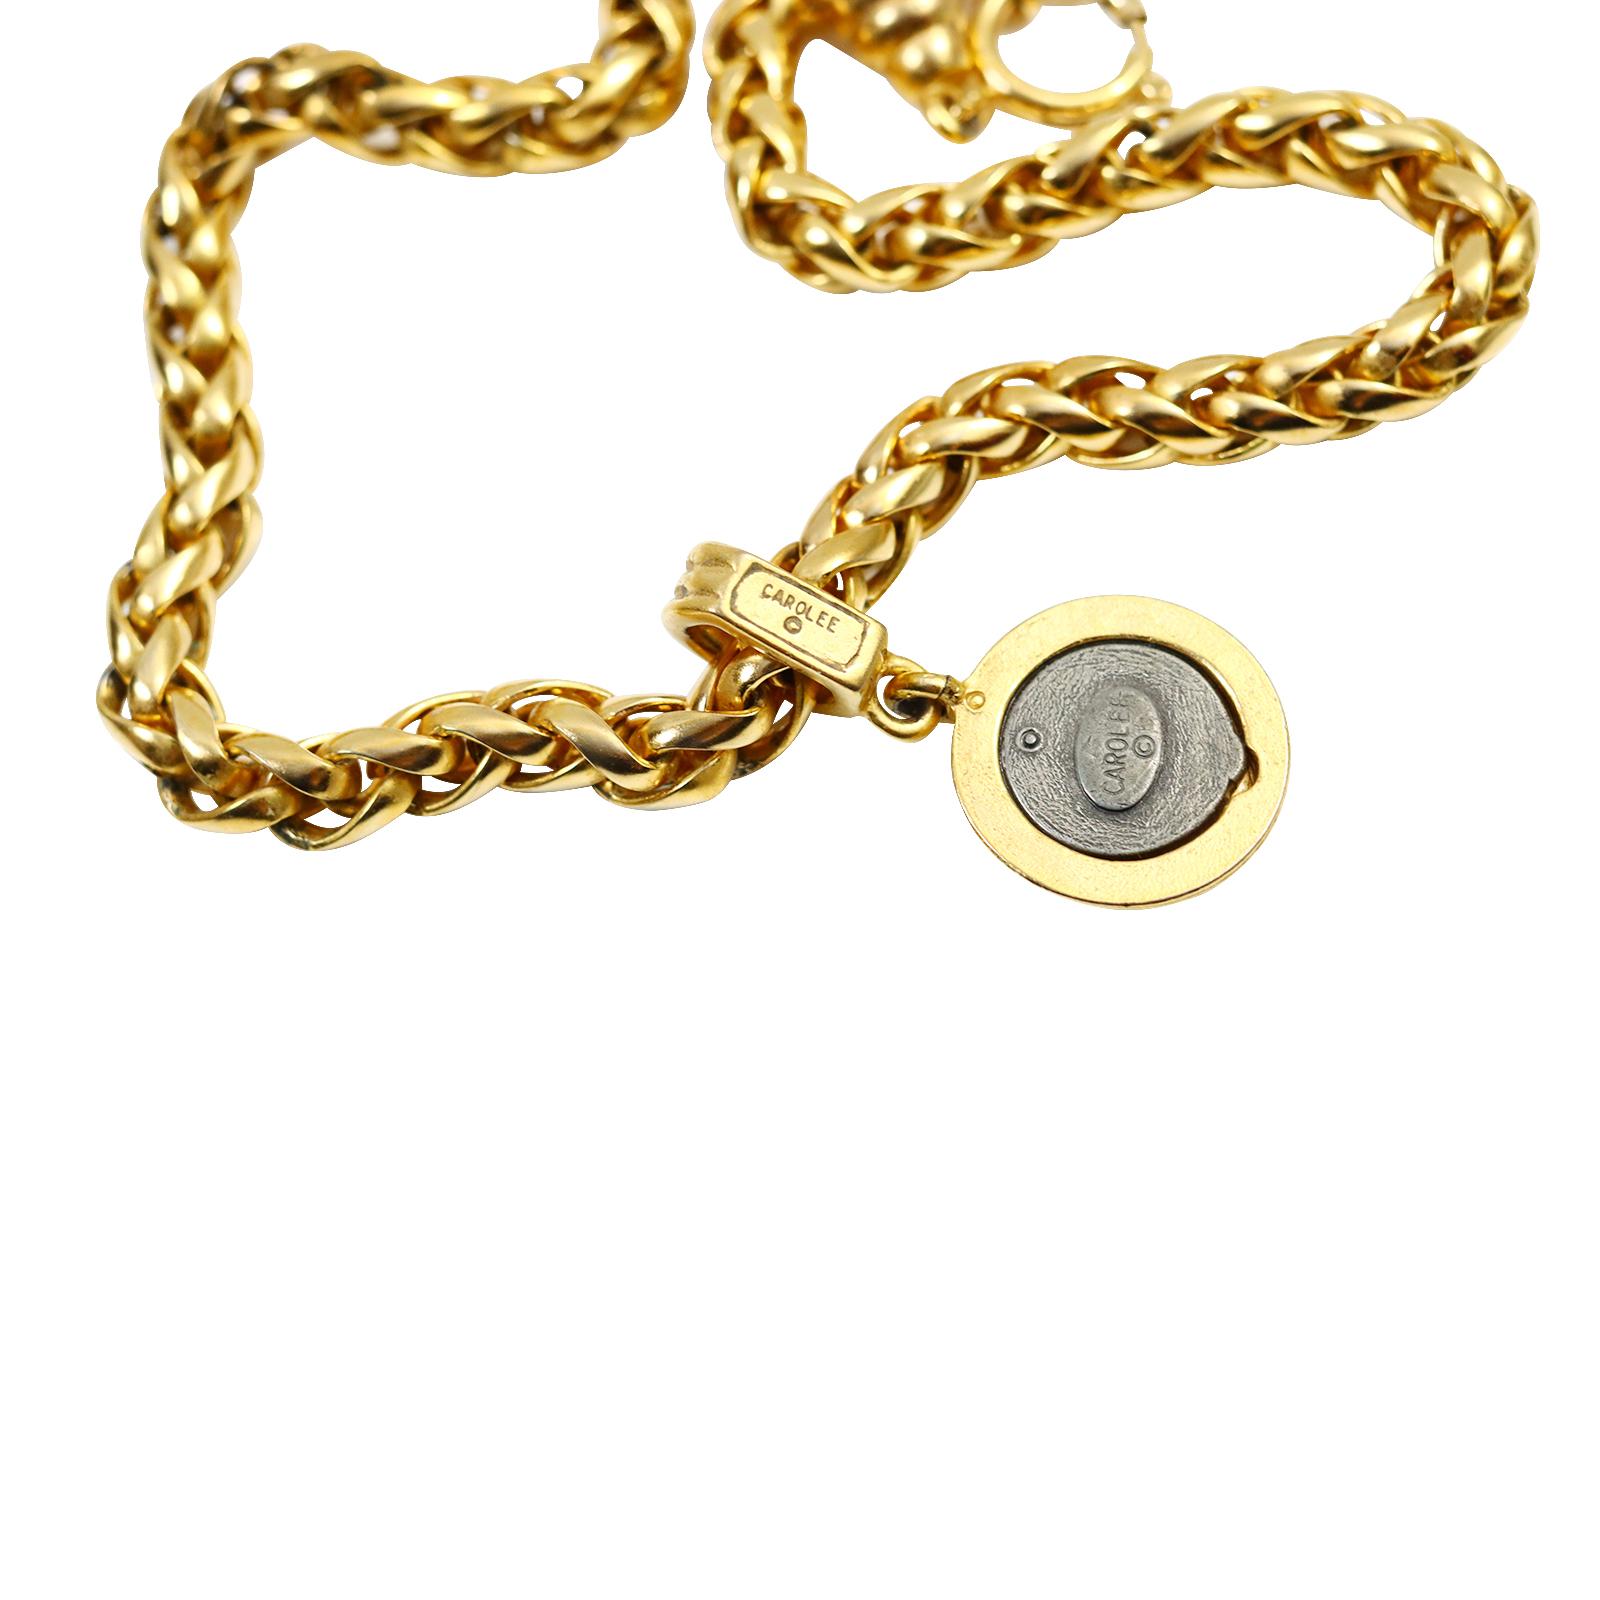 Vintage Carolee Gold Chain and Dangling Coin Necklace, circa 1990s For Sale 3